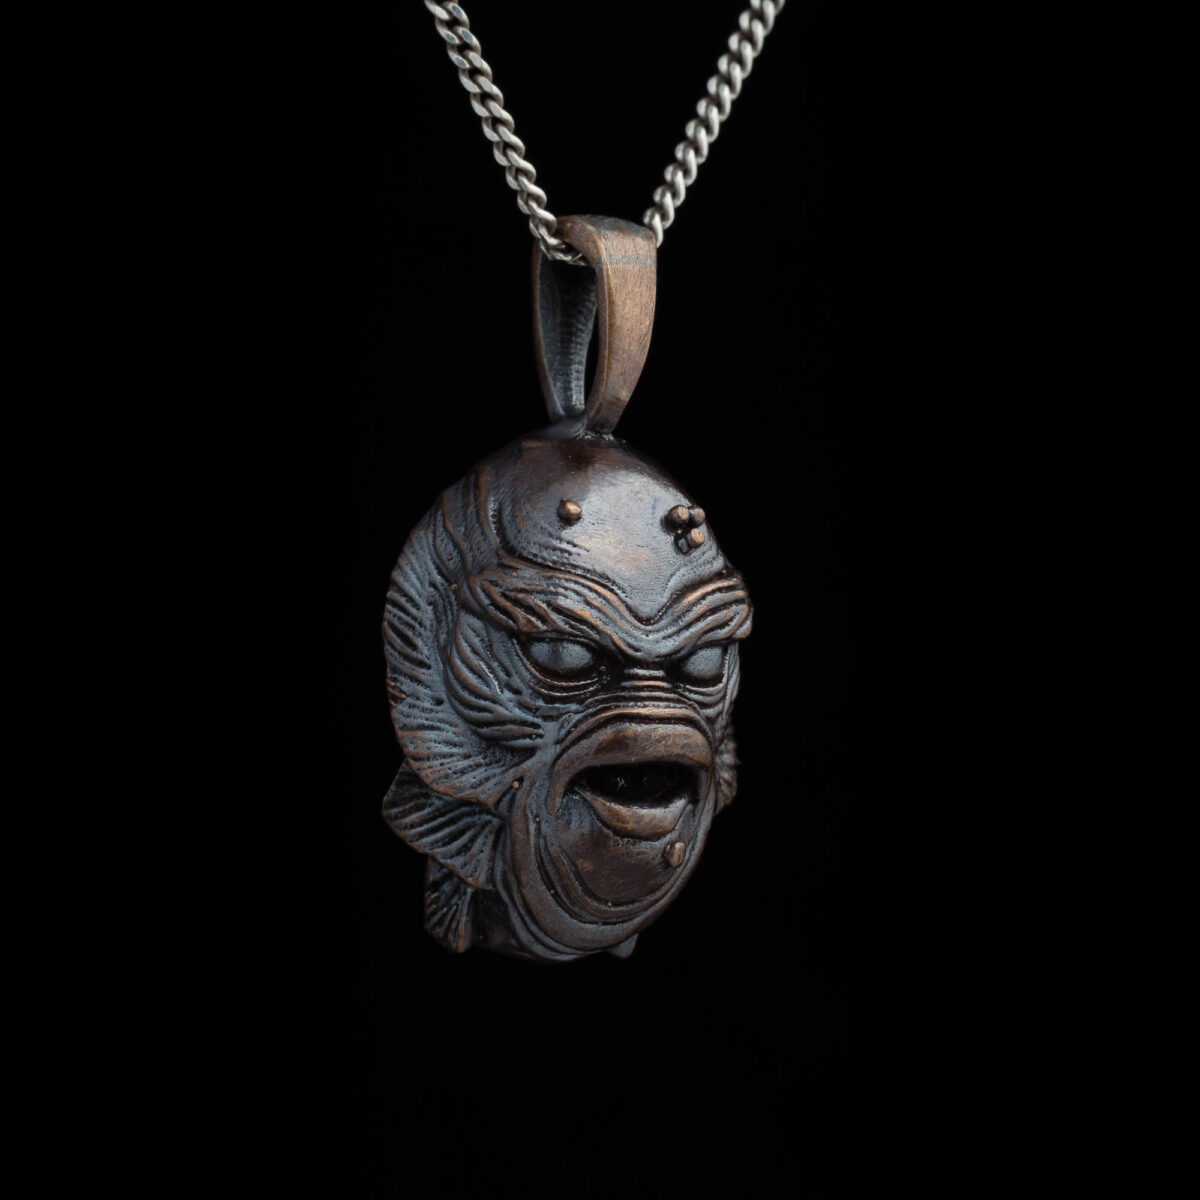 Creature from the Black Lagoon Pendant